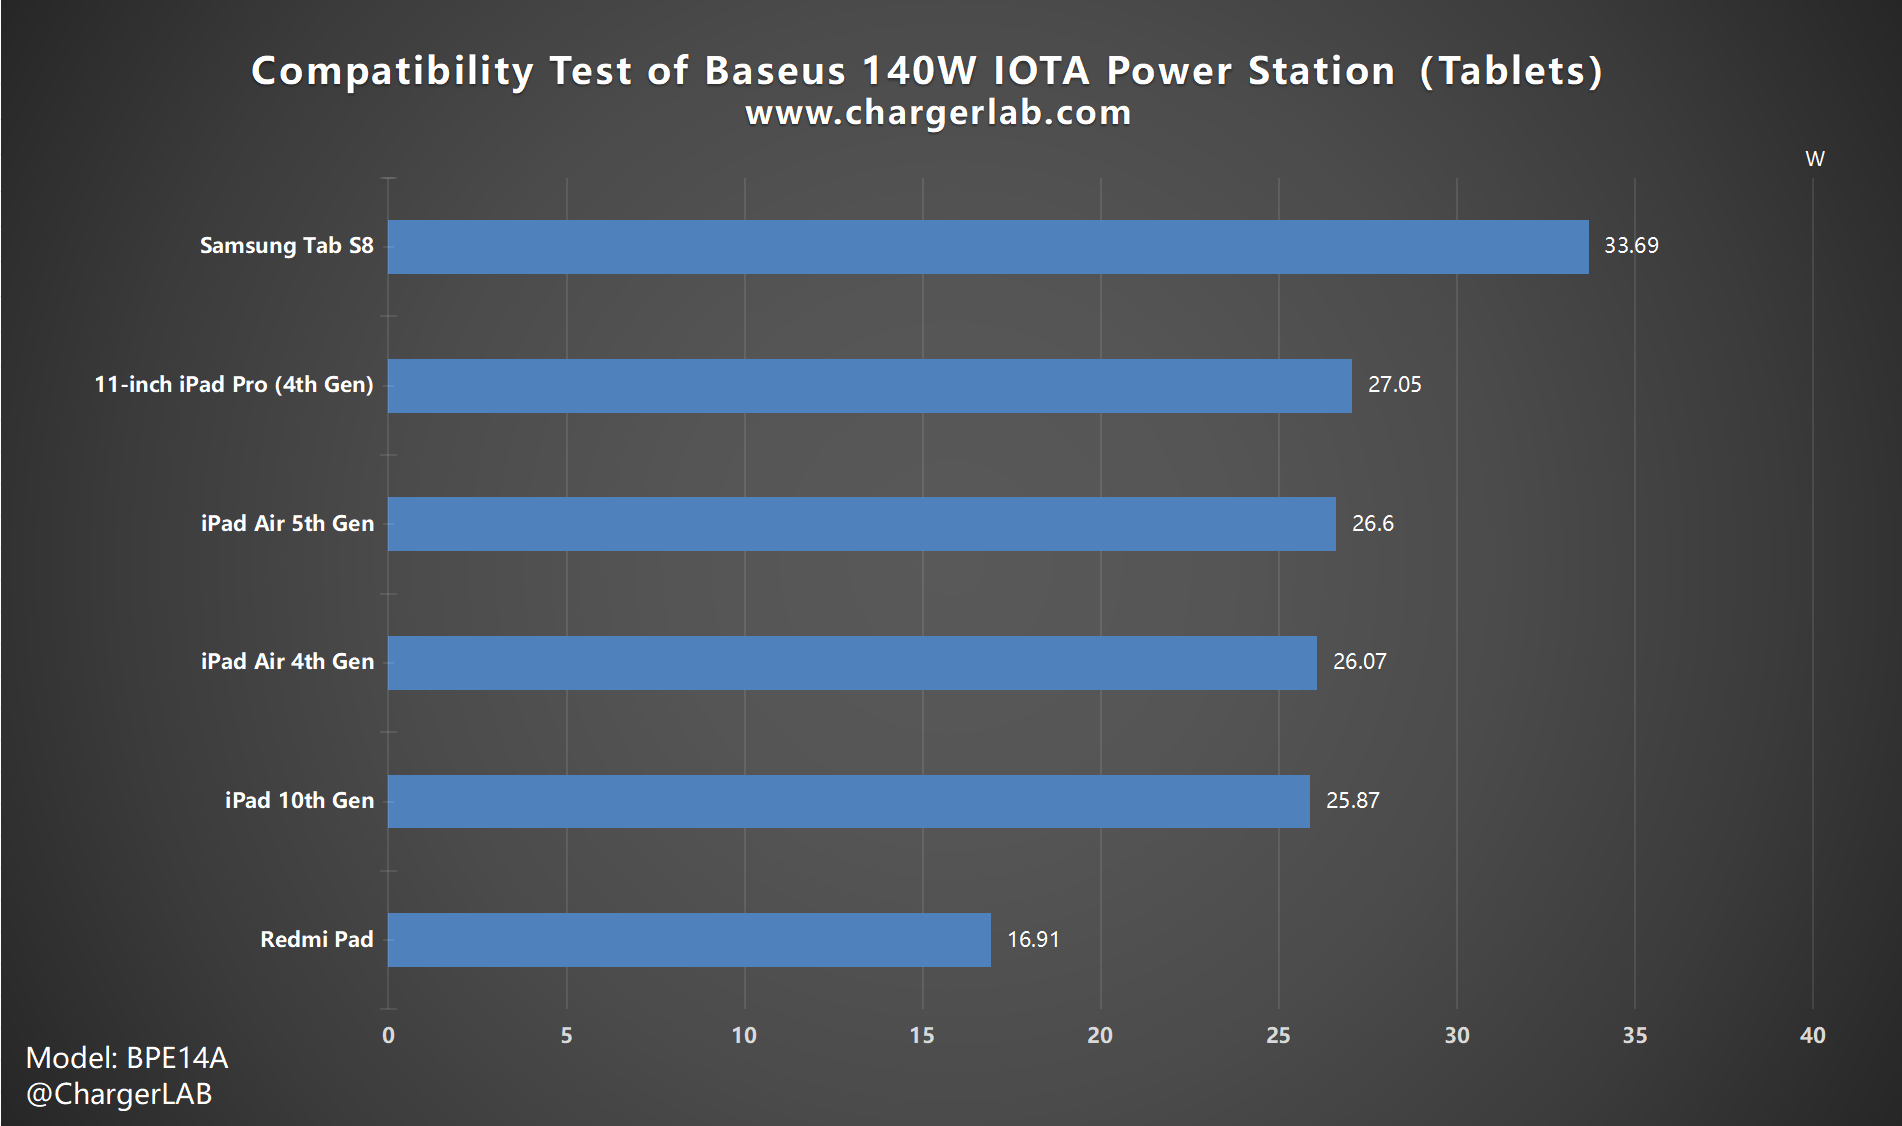 New Kid on the Block | Baseus 140W IOTA Power Station ChargerLAB Compatibility 100-Chargerlab